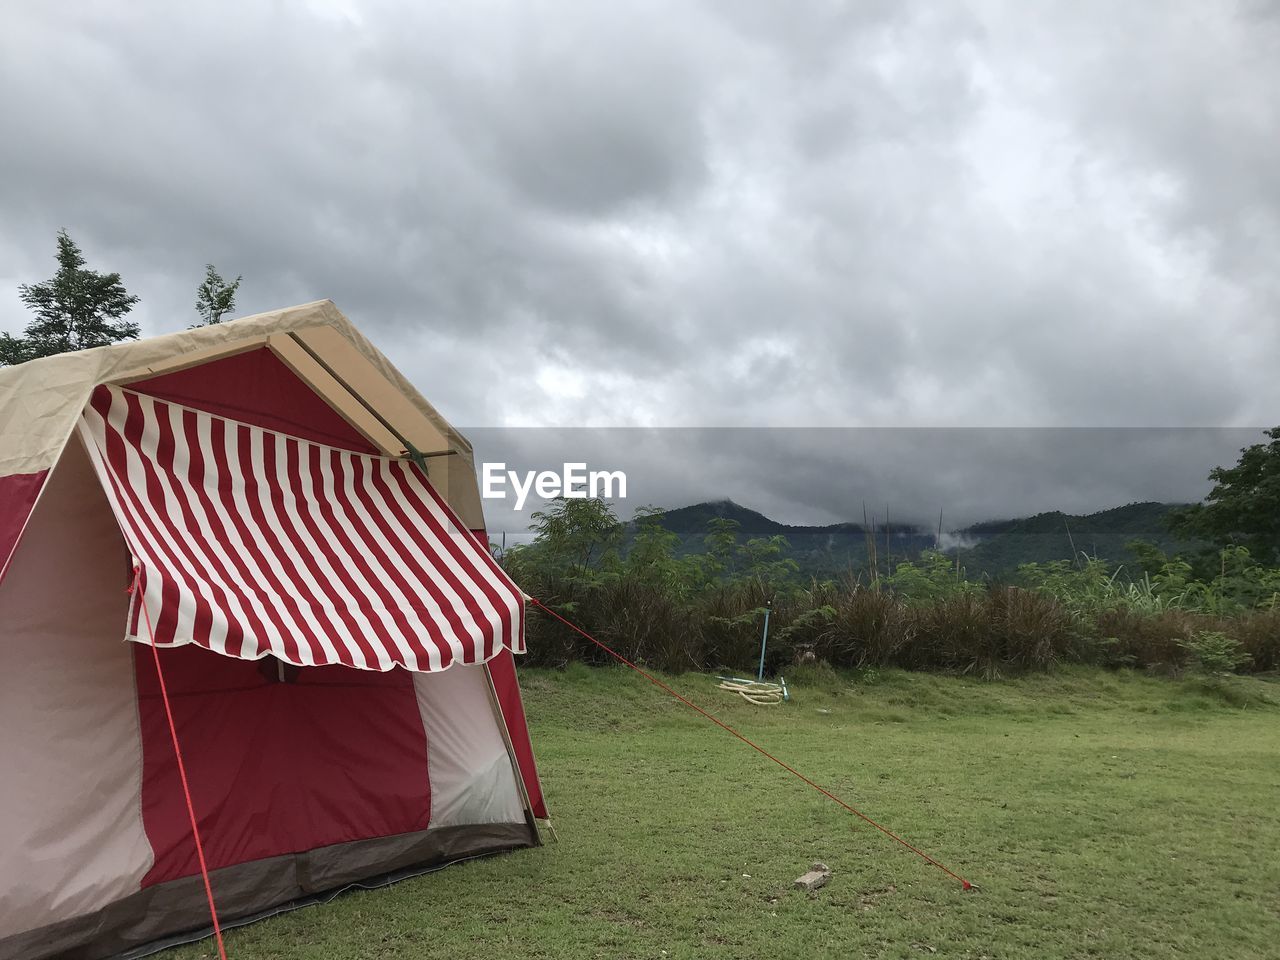 cloud, sky, nature, grass, tent, plant, environment, landscape, land, camping, overcast, no people, tree, architecture, scenics - nature, non-urban scene, mountain, beauty in nature, outdoors, day, storm cloud, rural scene, storm, house, tranquility, built structure, vacation, trip, field, holiday